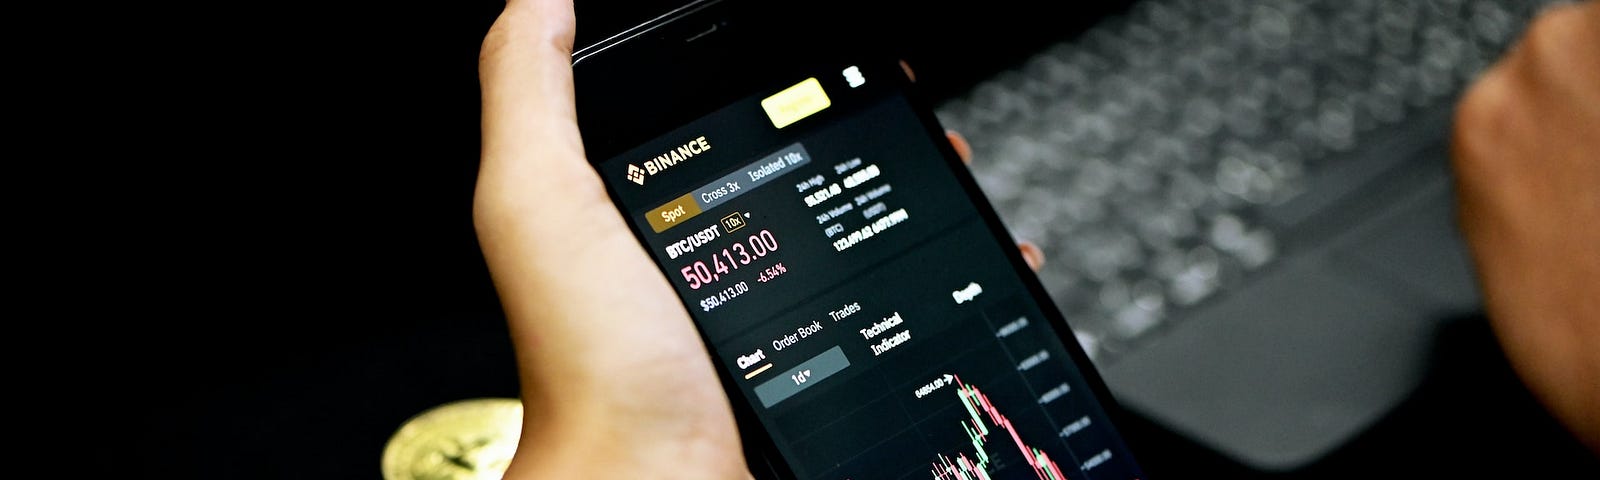 IMAGE: Two female hands holding a smartphone with the cryptocurrency exchange Binance on its screen